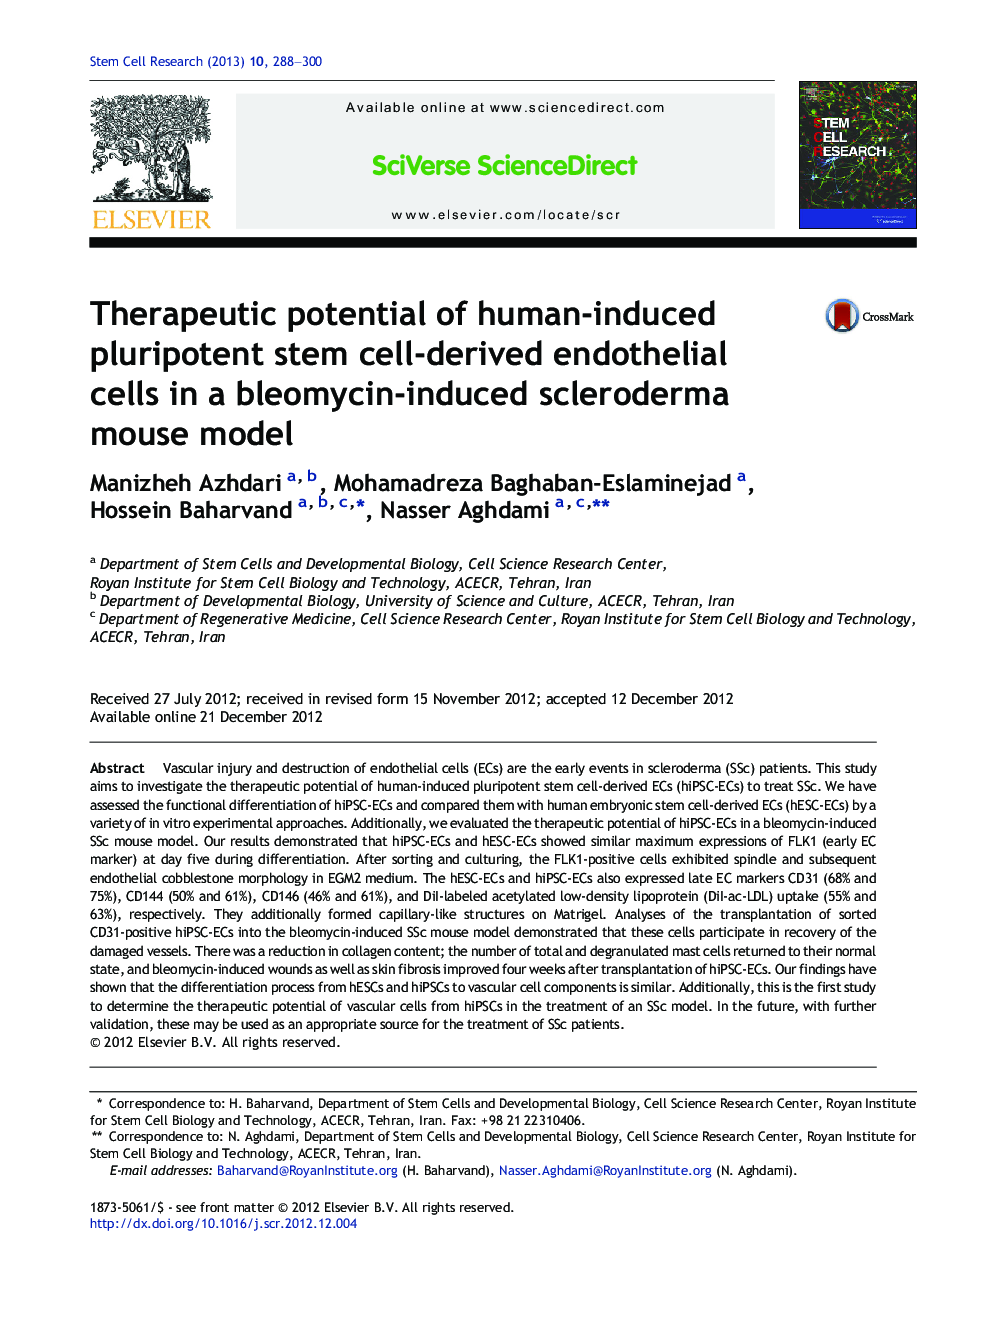 Therapeutic potential of human-induced pluripotent stem cell-derived endothelial cells in a bleomycin-induced scleroderma mouse model